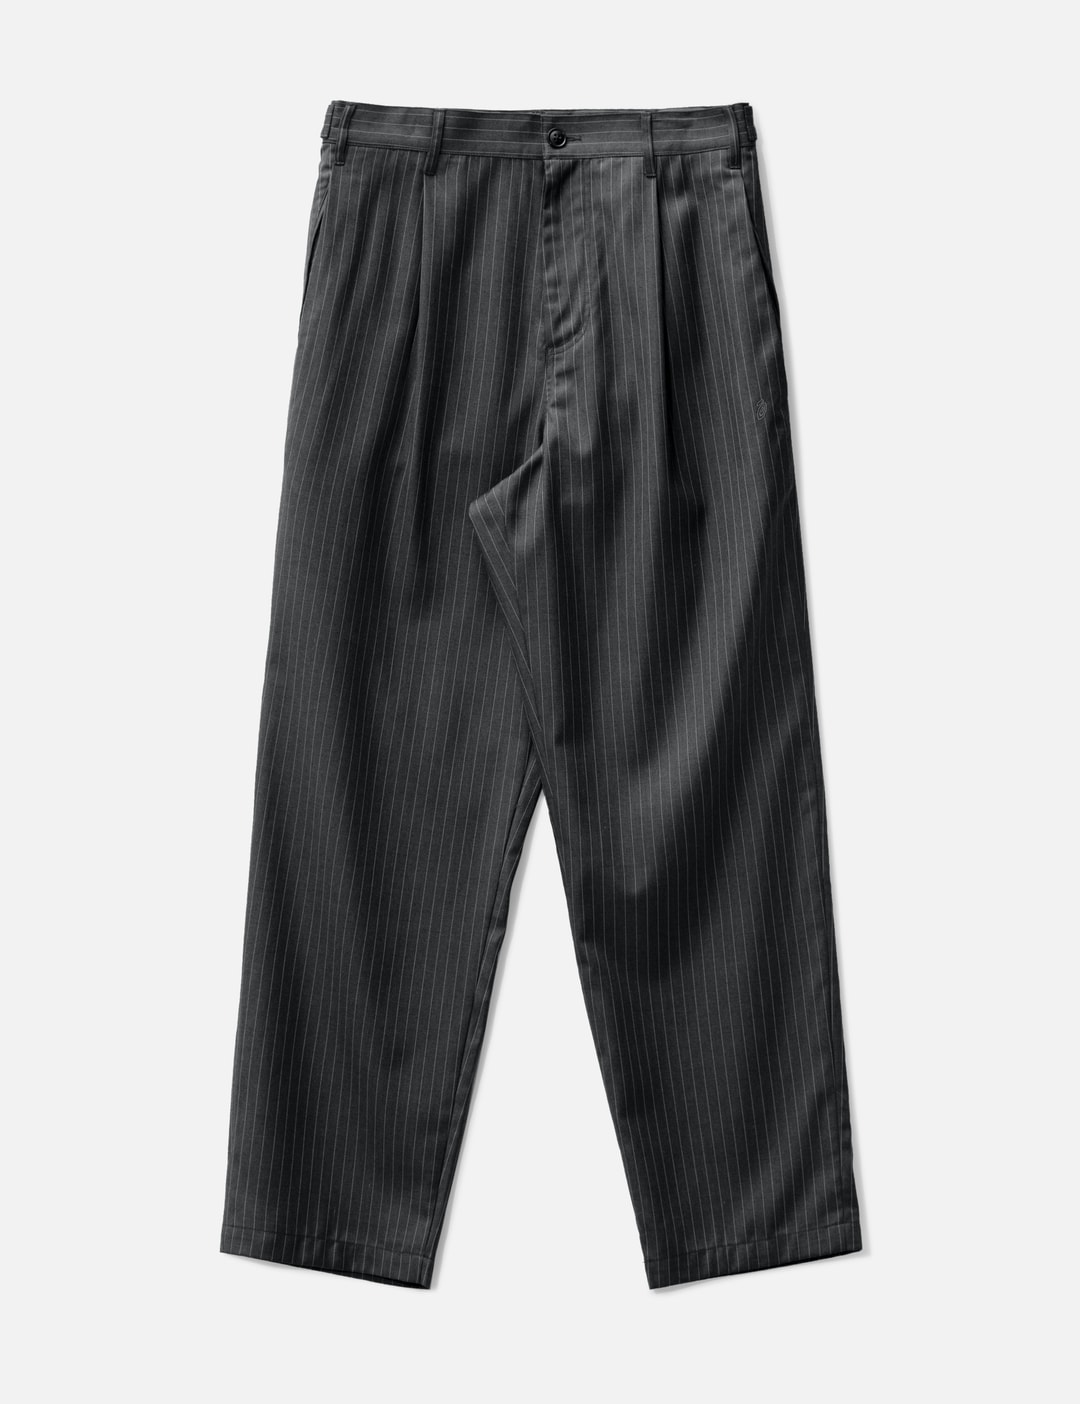 Stüssy - Stripe Volume Pleated Trousers | HBX - Globally Curated ...